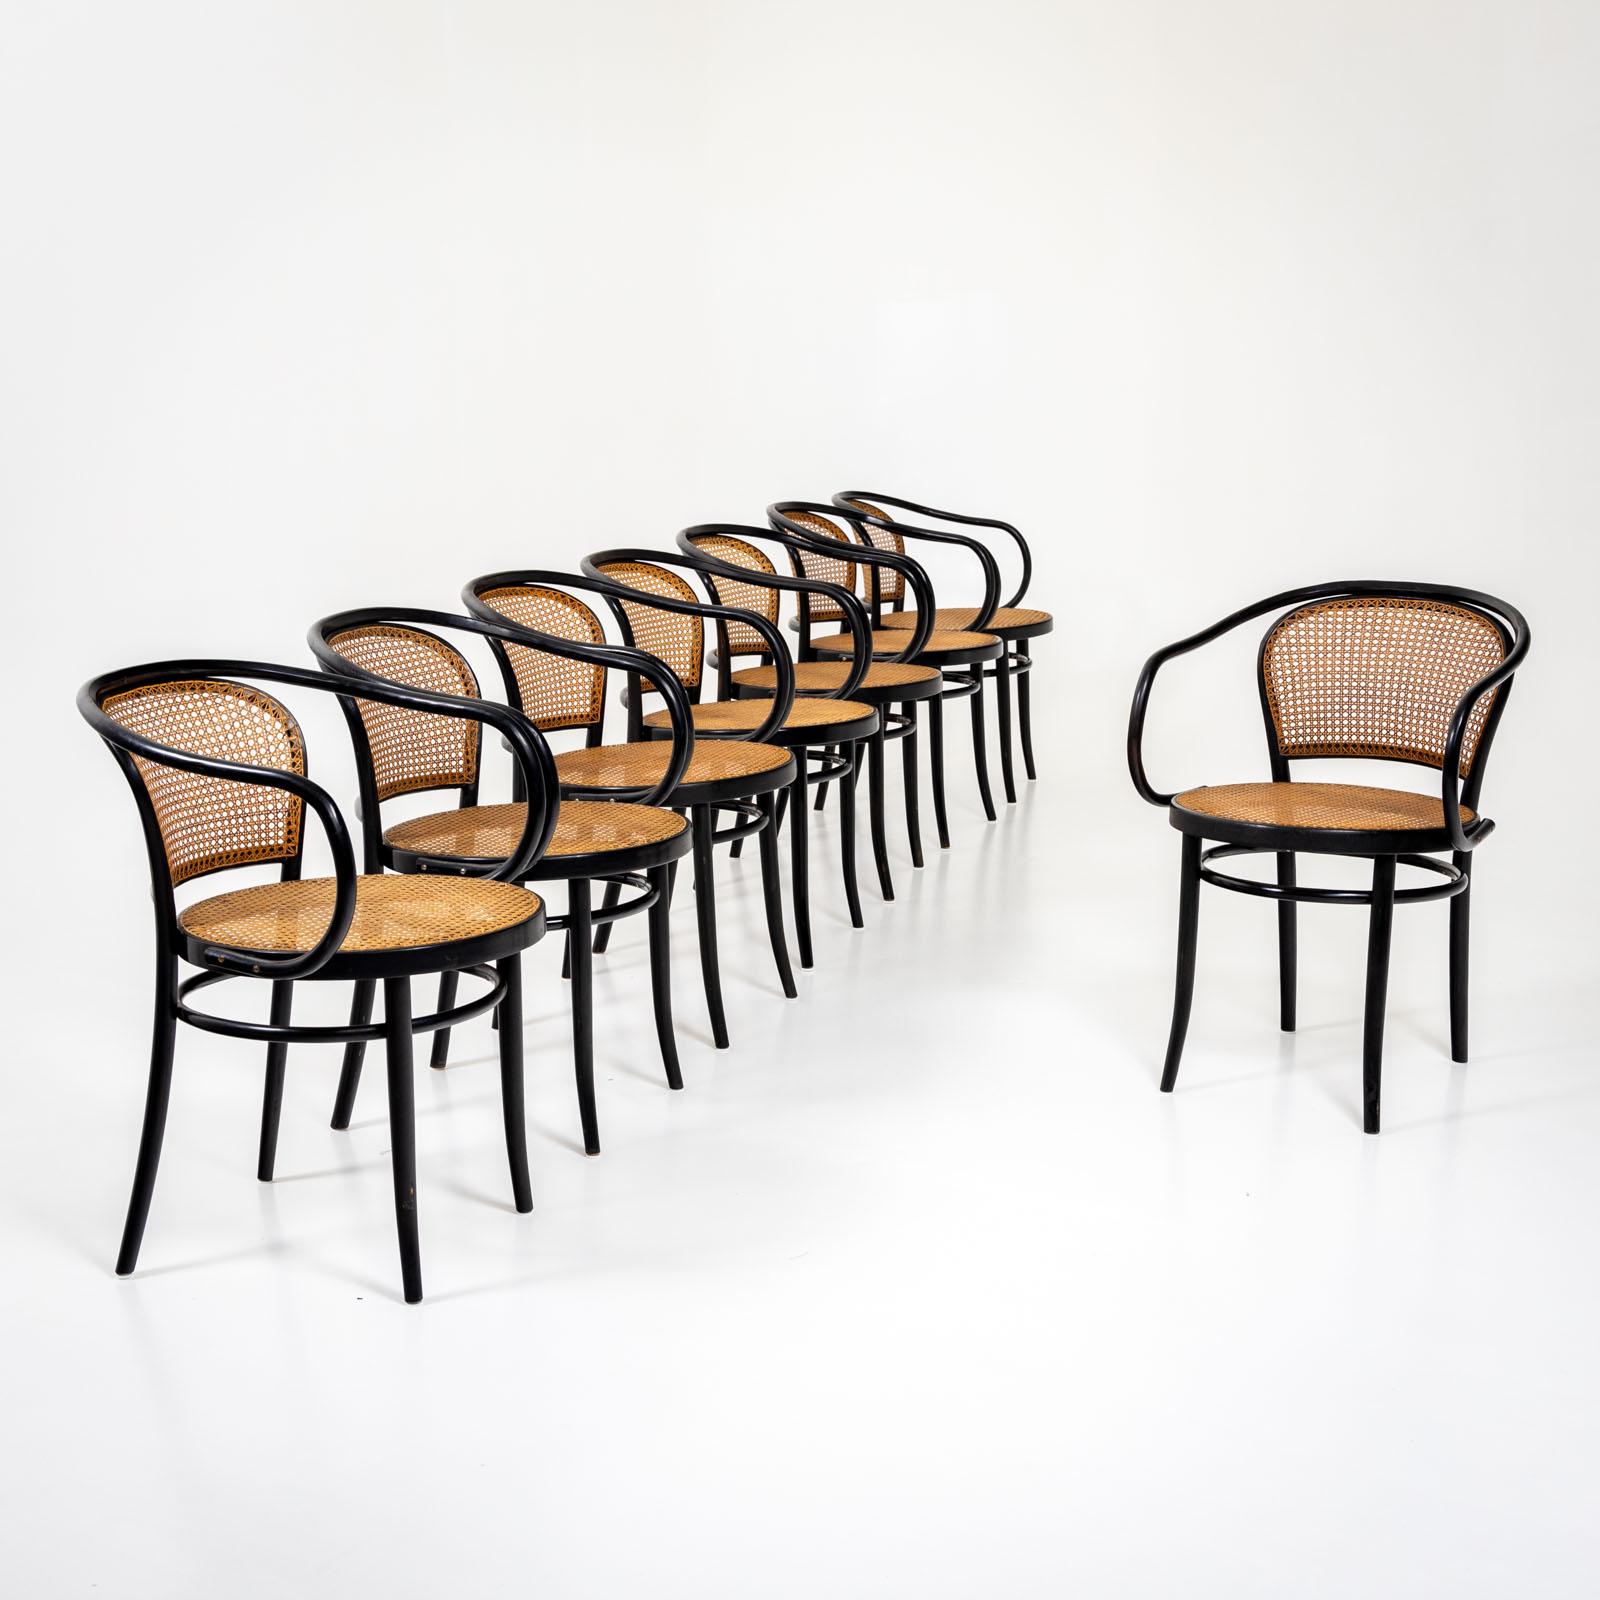 Set of ten black bentwood chairs by Drevounia, formerly Czechoslovakia. The chairs are designed in the style of Thonet. The seats and backrests are covered with Viennese wickerwork. Label on the underside: 